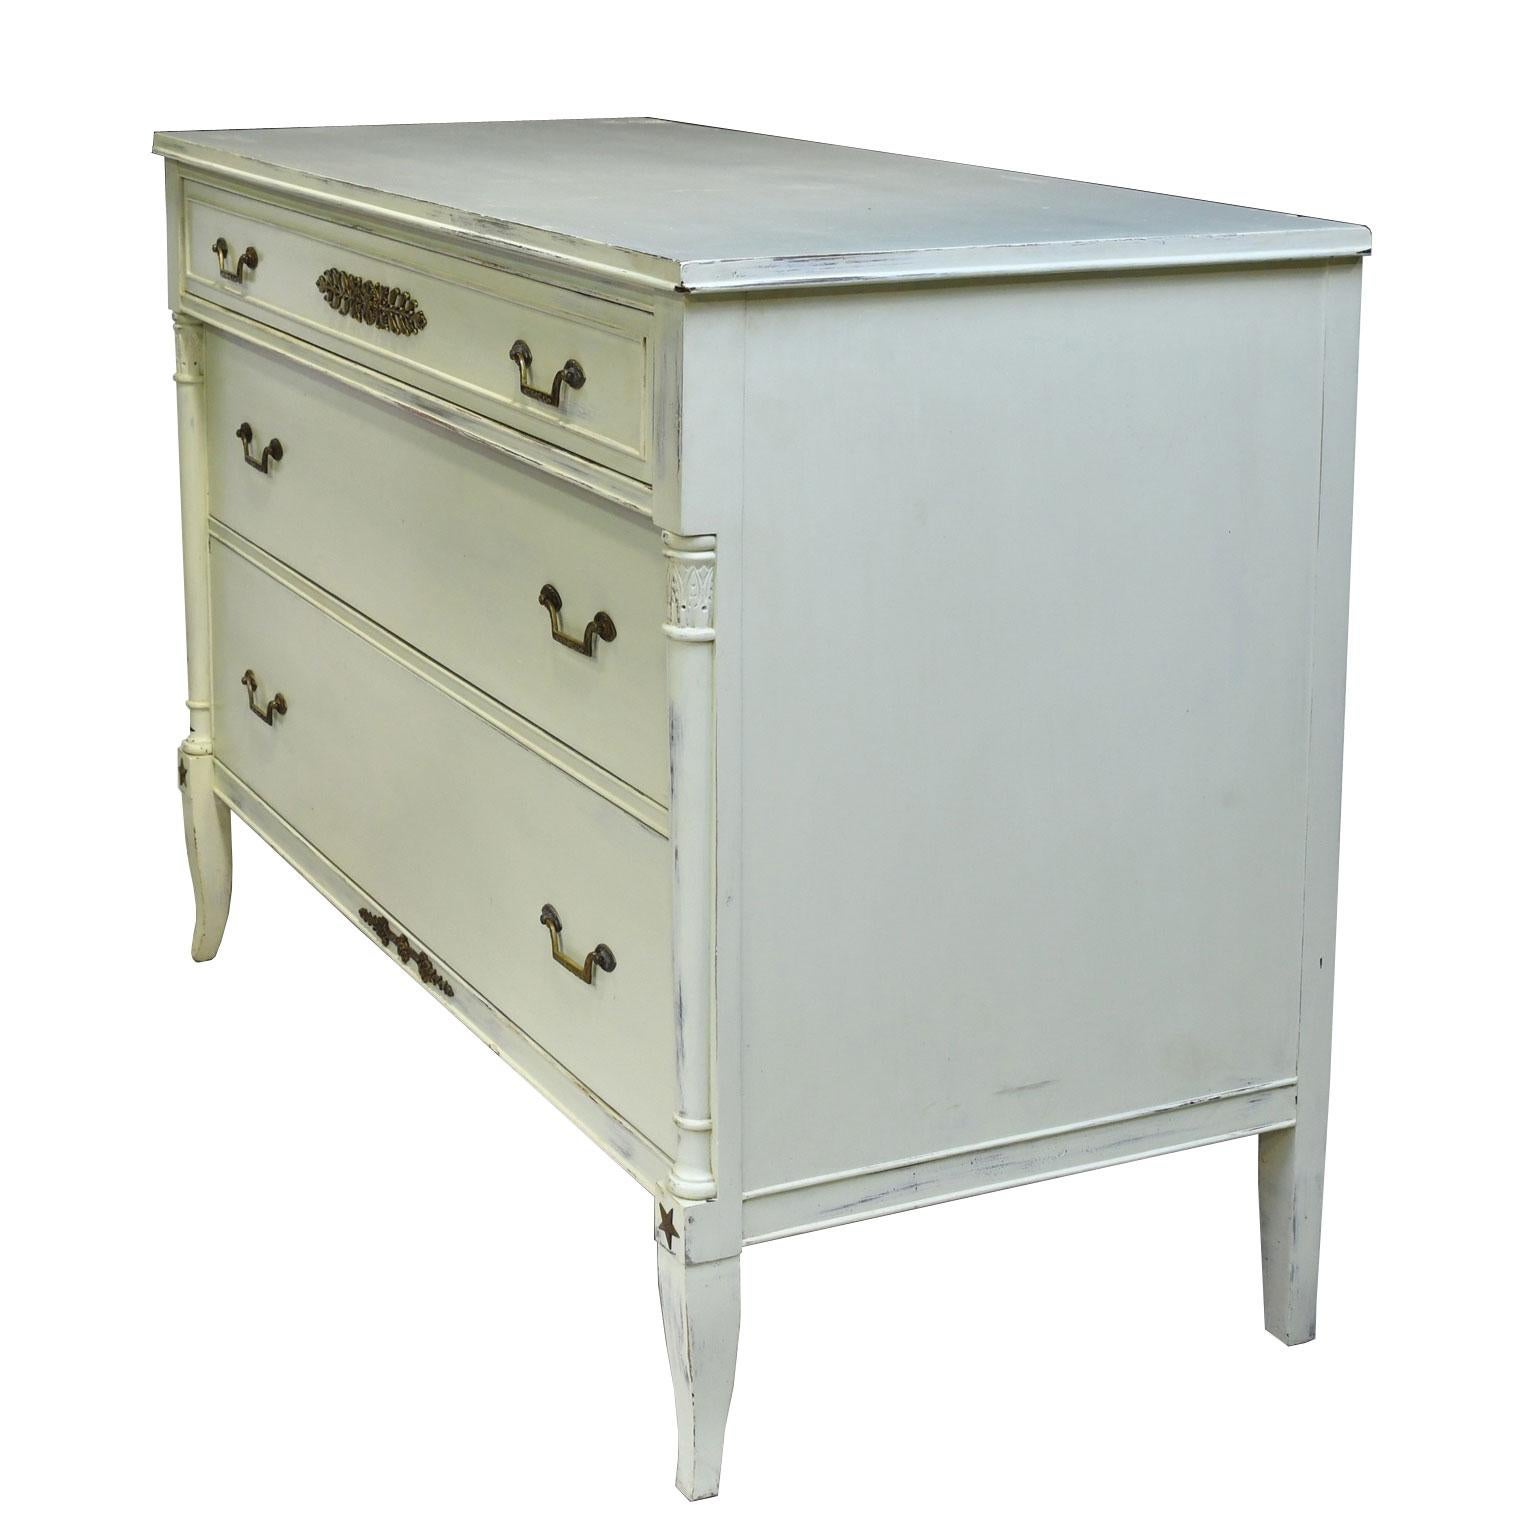 A charming Swedish Gustavian-style/ Empire-style chest in a painted light-pastel green finish, with three long storage drawers of staggered depths. All parts of the chest of drawers are made of solid mahogany (except for the back) & features lovely